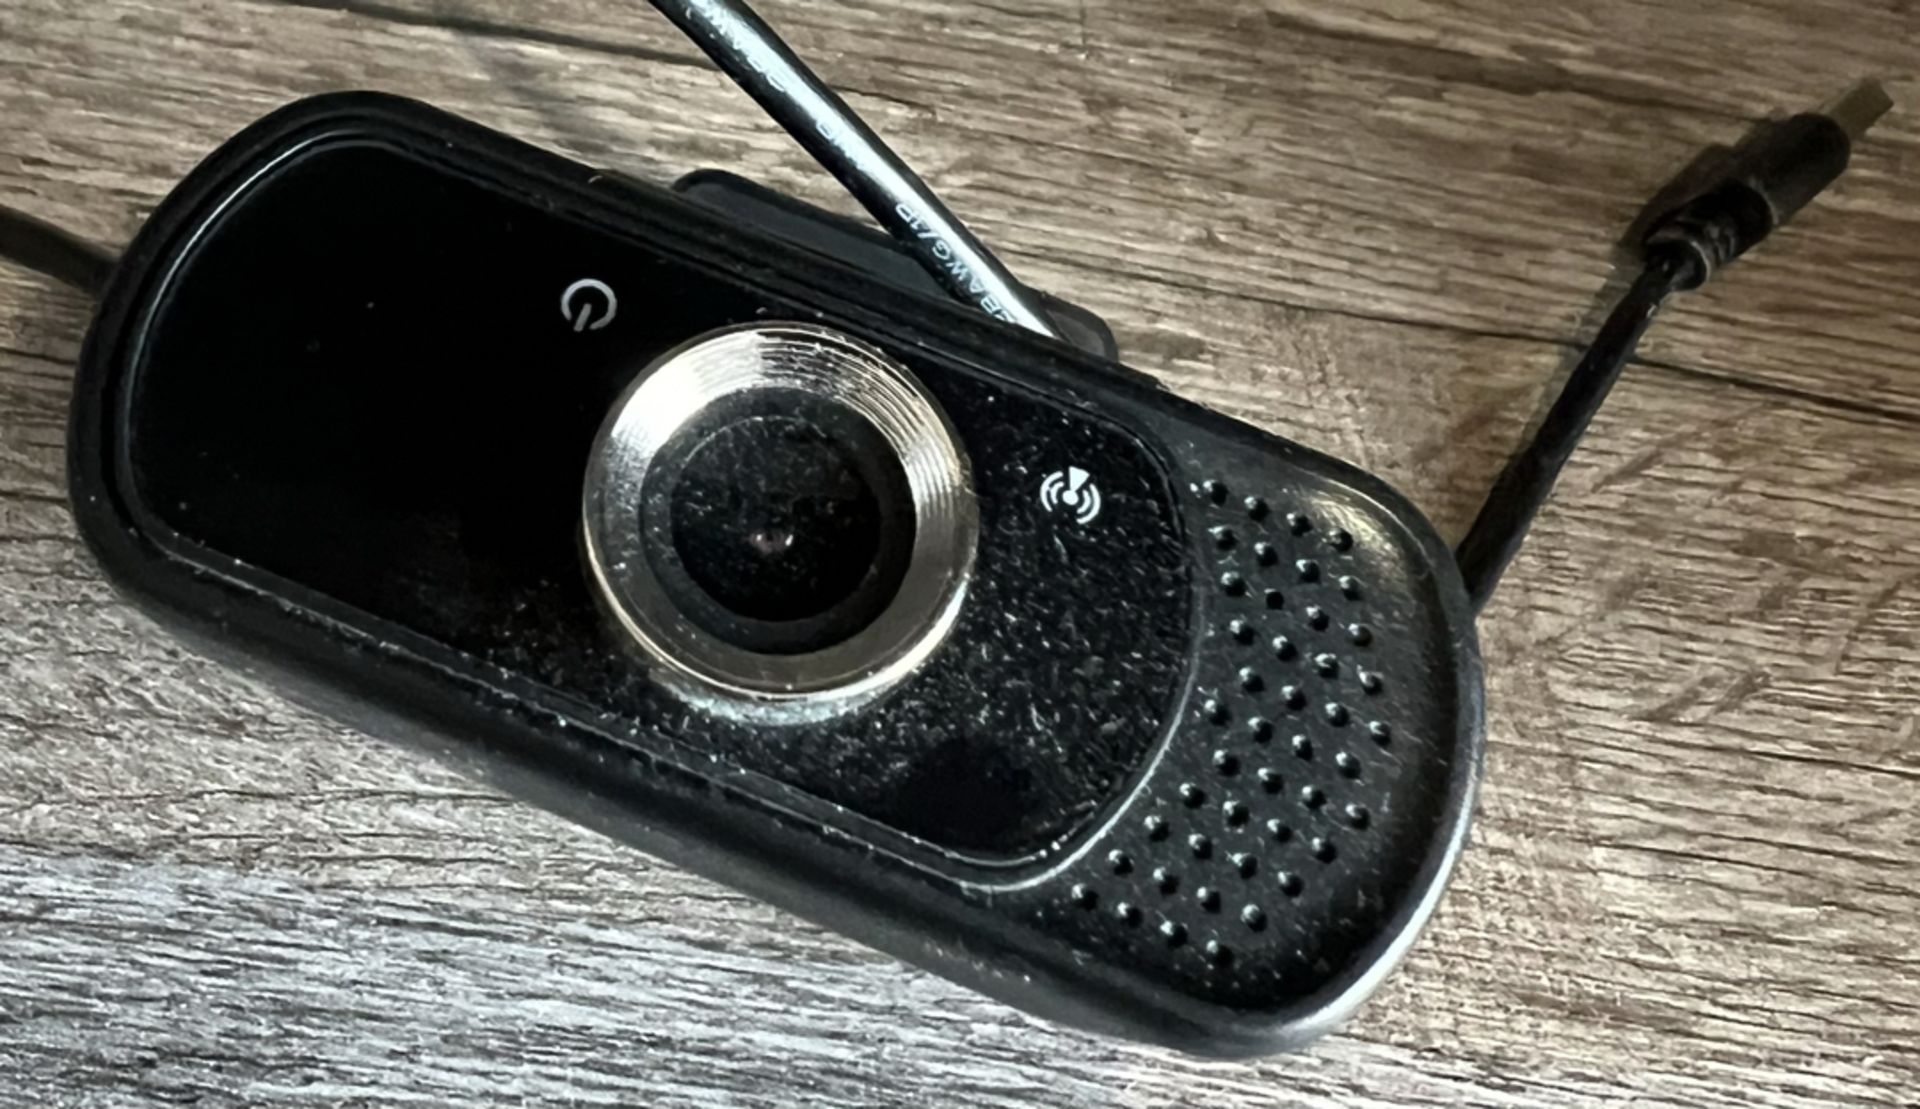 N5 3.6mm Lens Clip-On WebCam- Tested and Working - Bild 3 aus 3